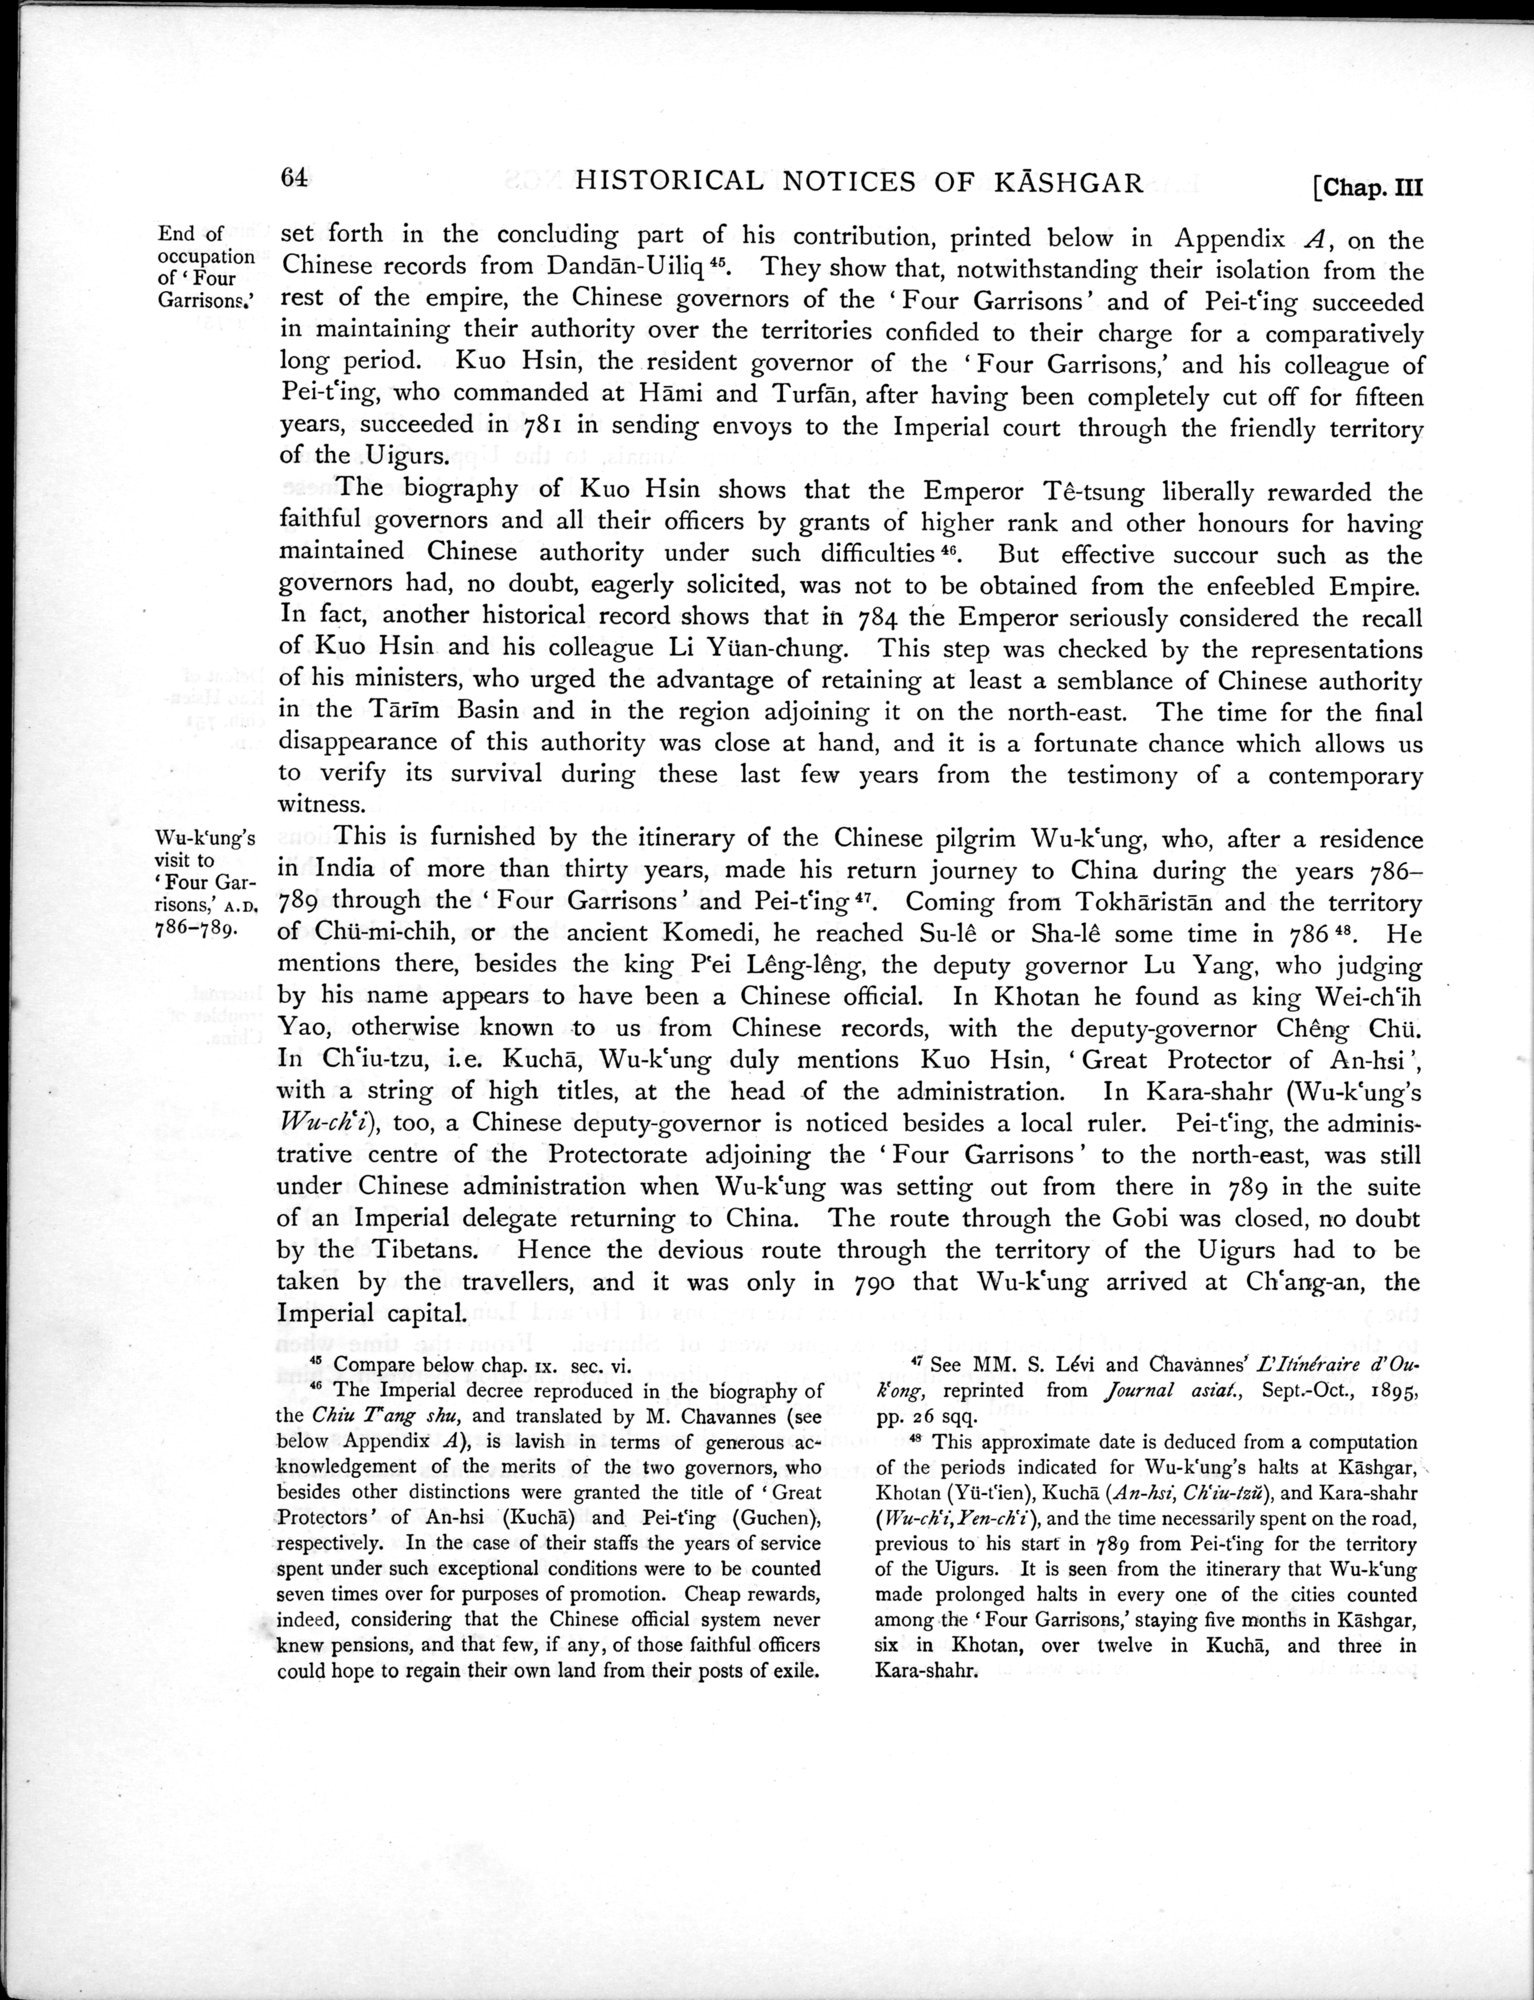 Ancient Khotan : vol.1 / Page 104 (Grayscale High Resolution Image)